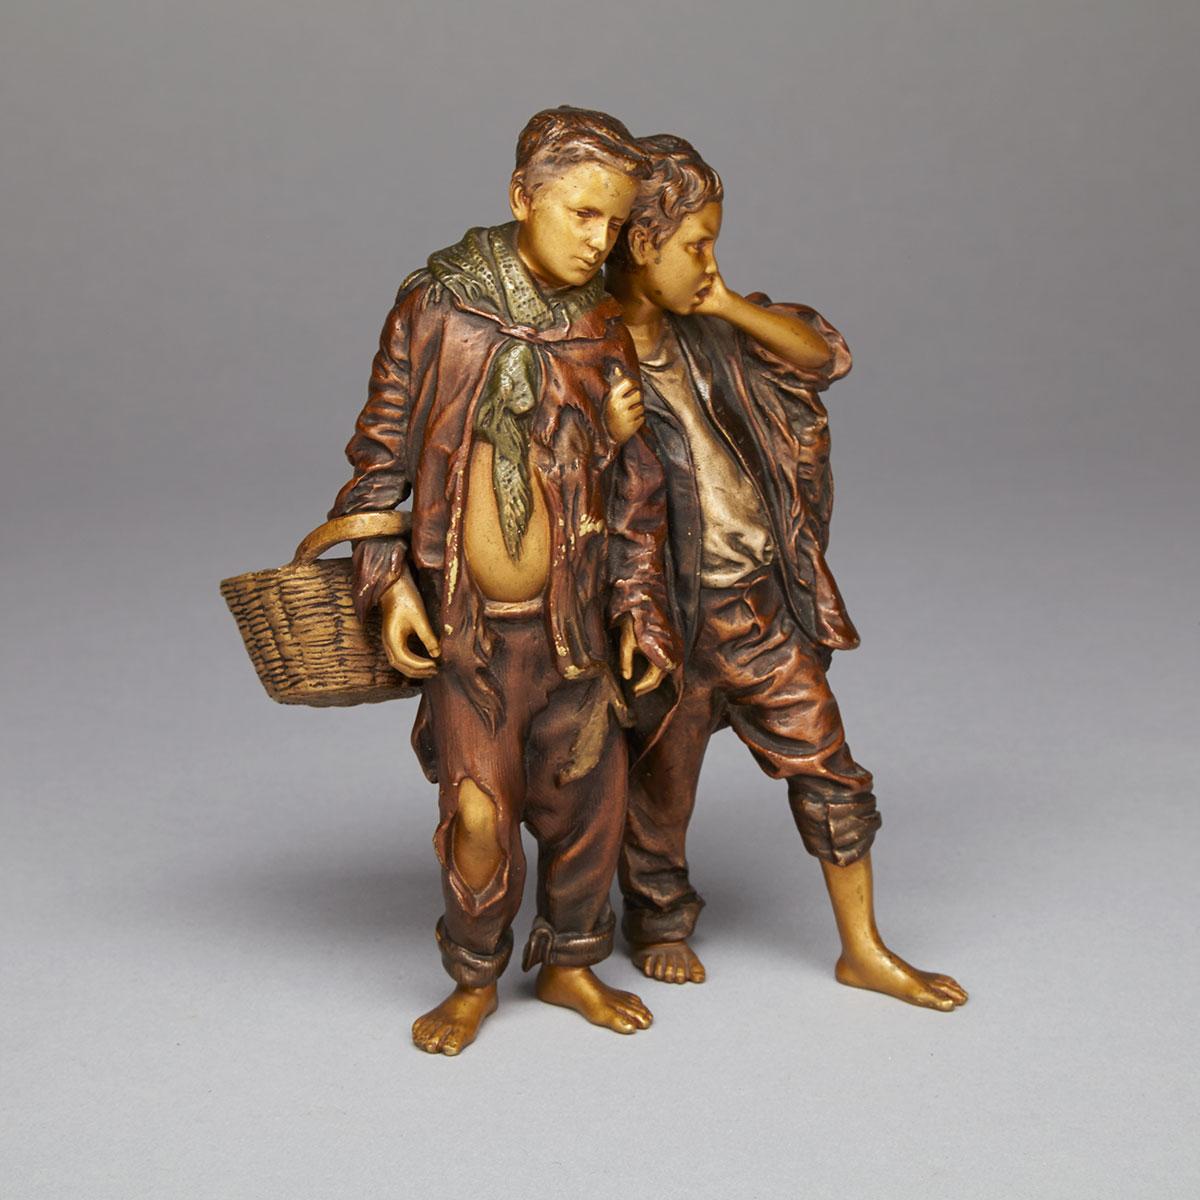 Bergman Cold Painted Bronze Group of Two Street Urchin Boys, c.1900